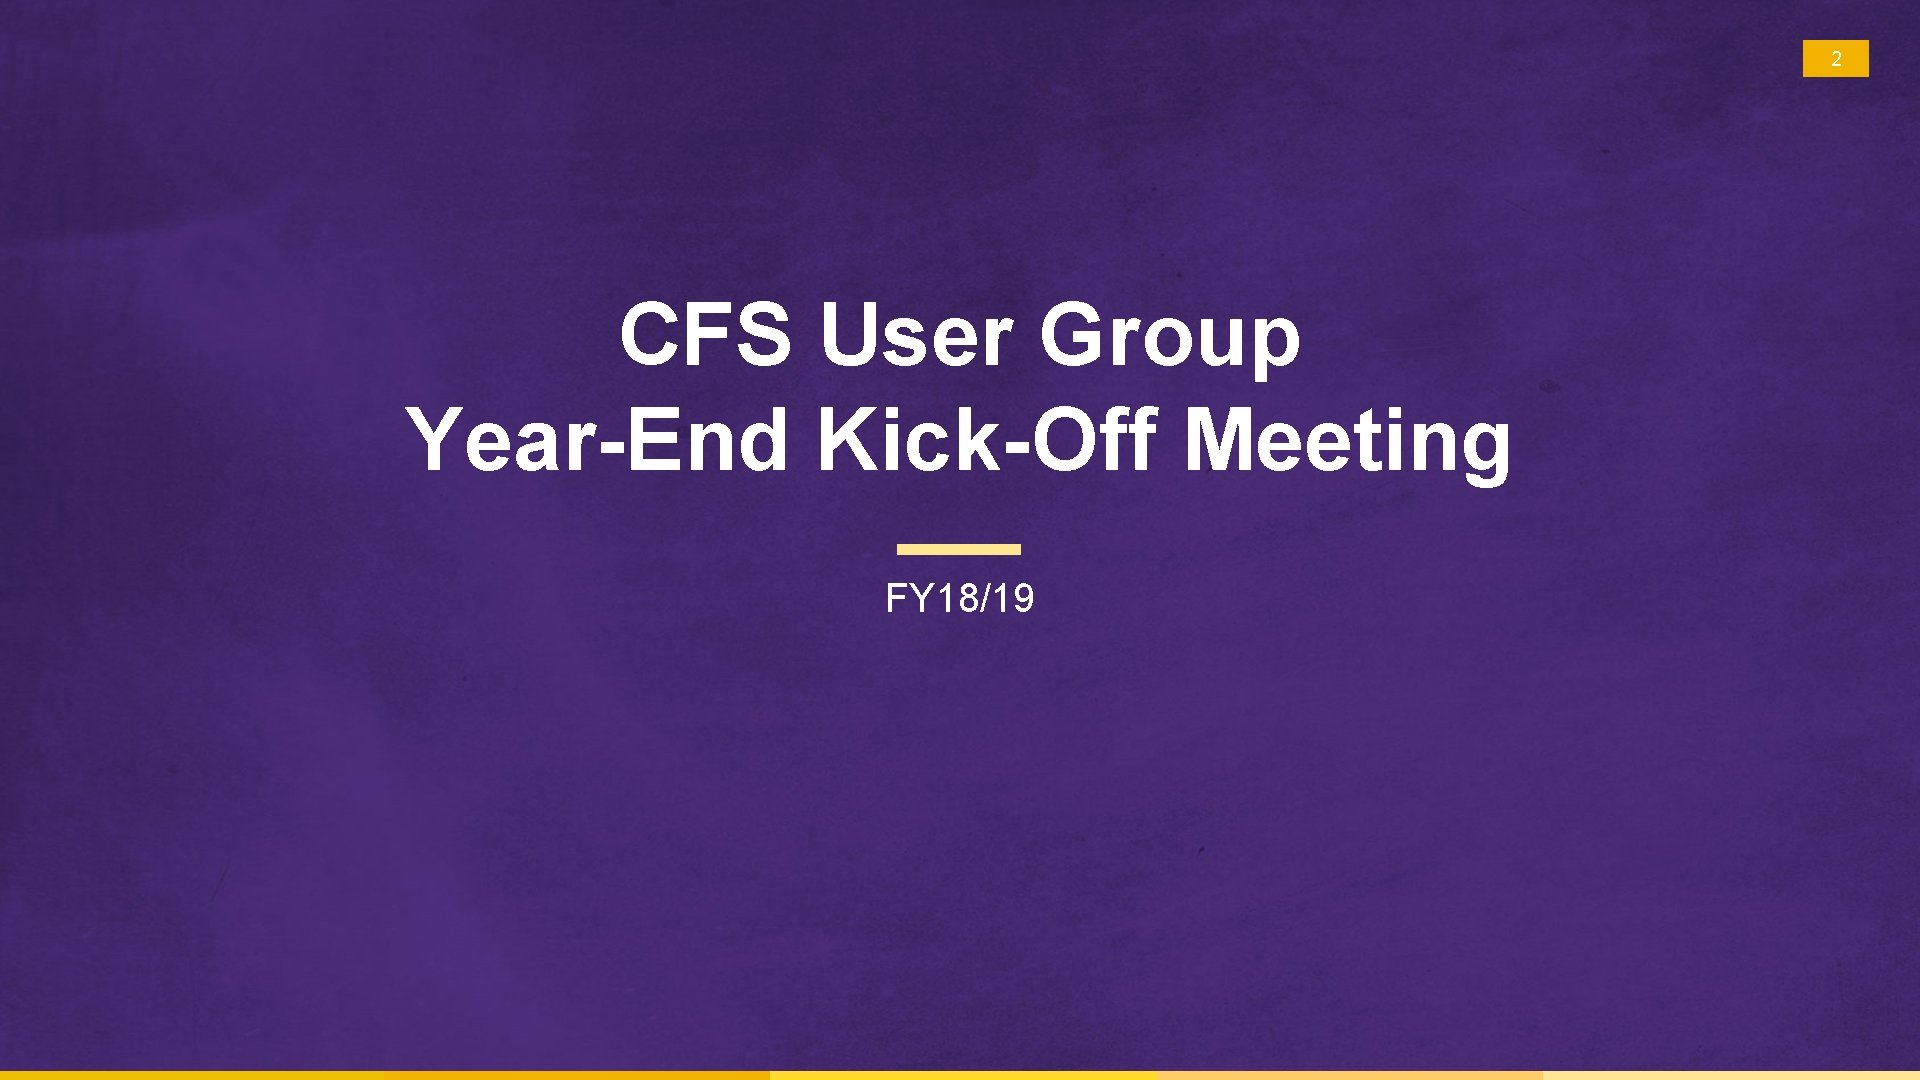 2 CFS User Group Year-End Kick-Off Meeting FY 18/19 